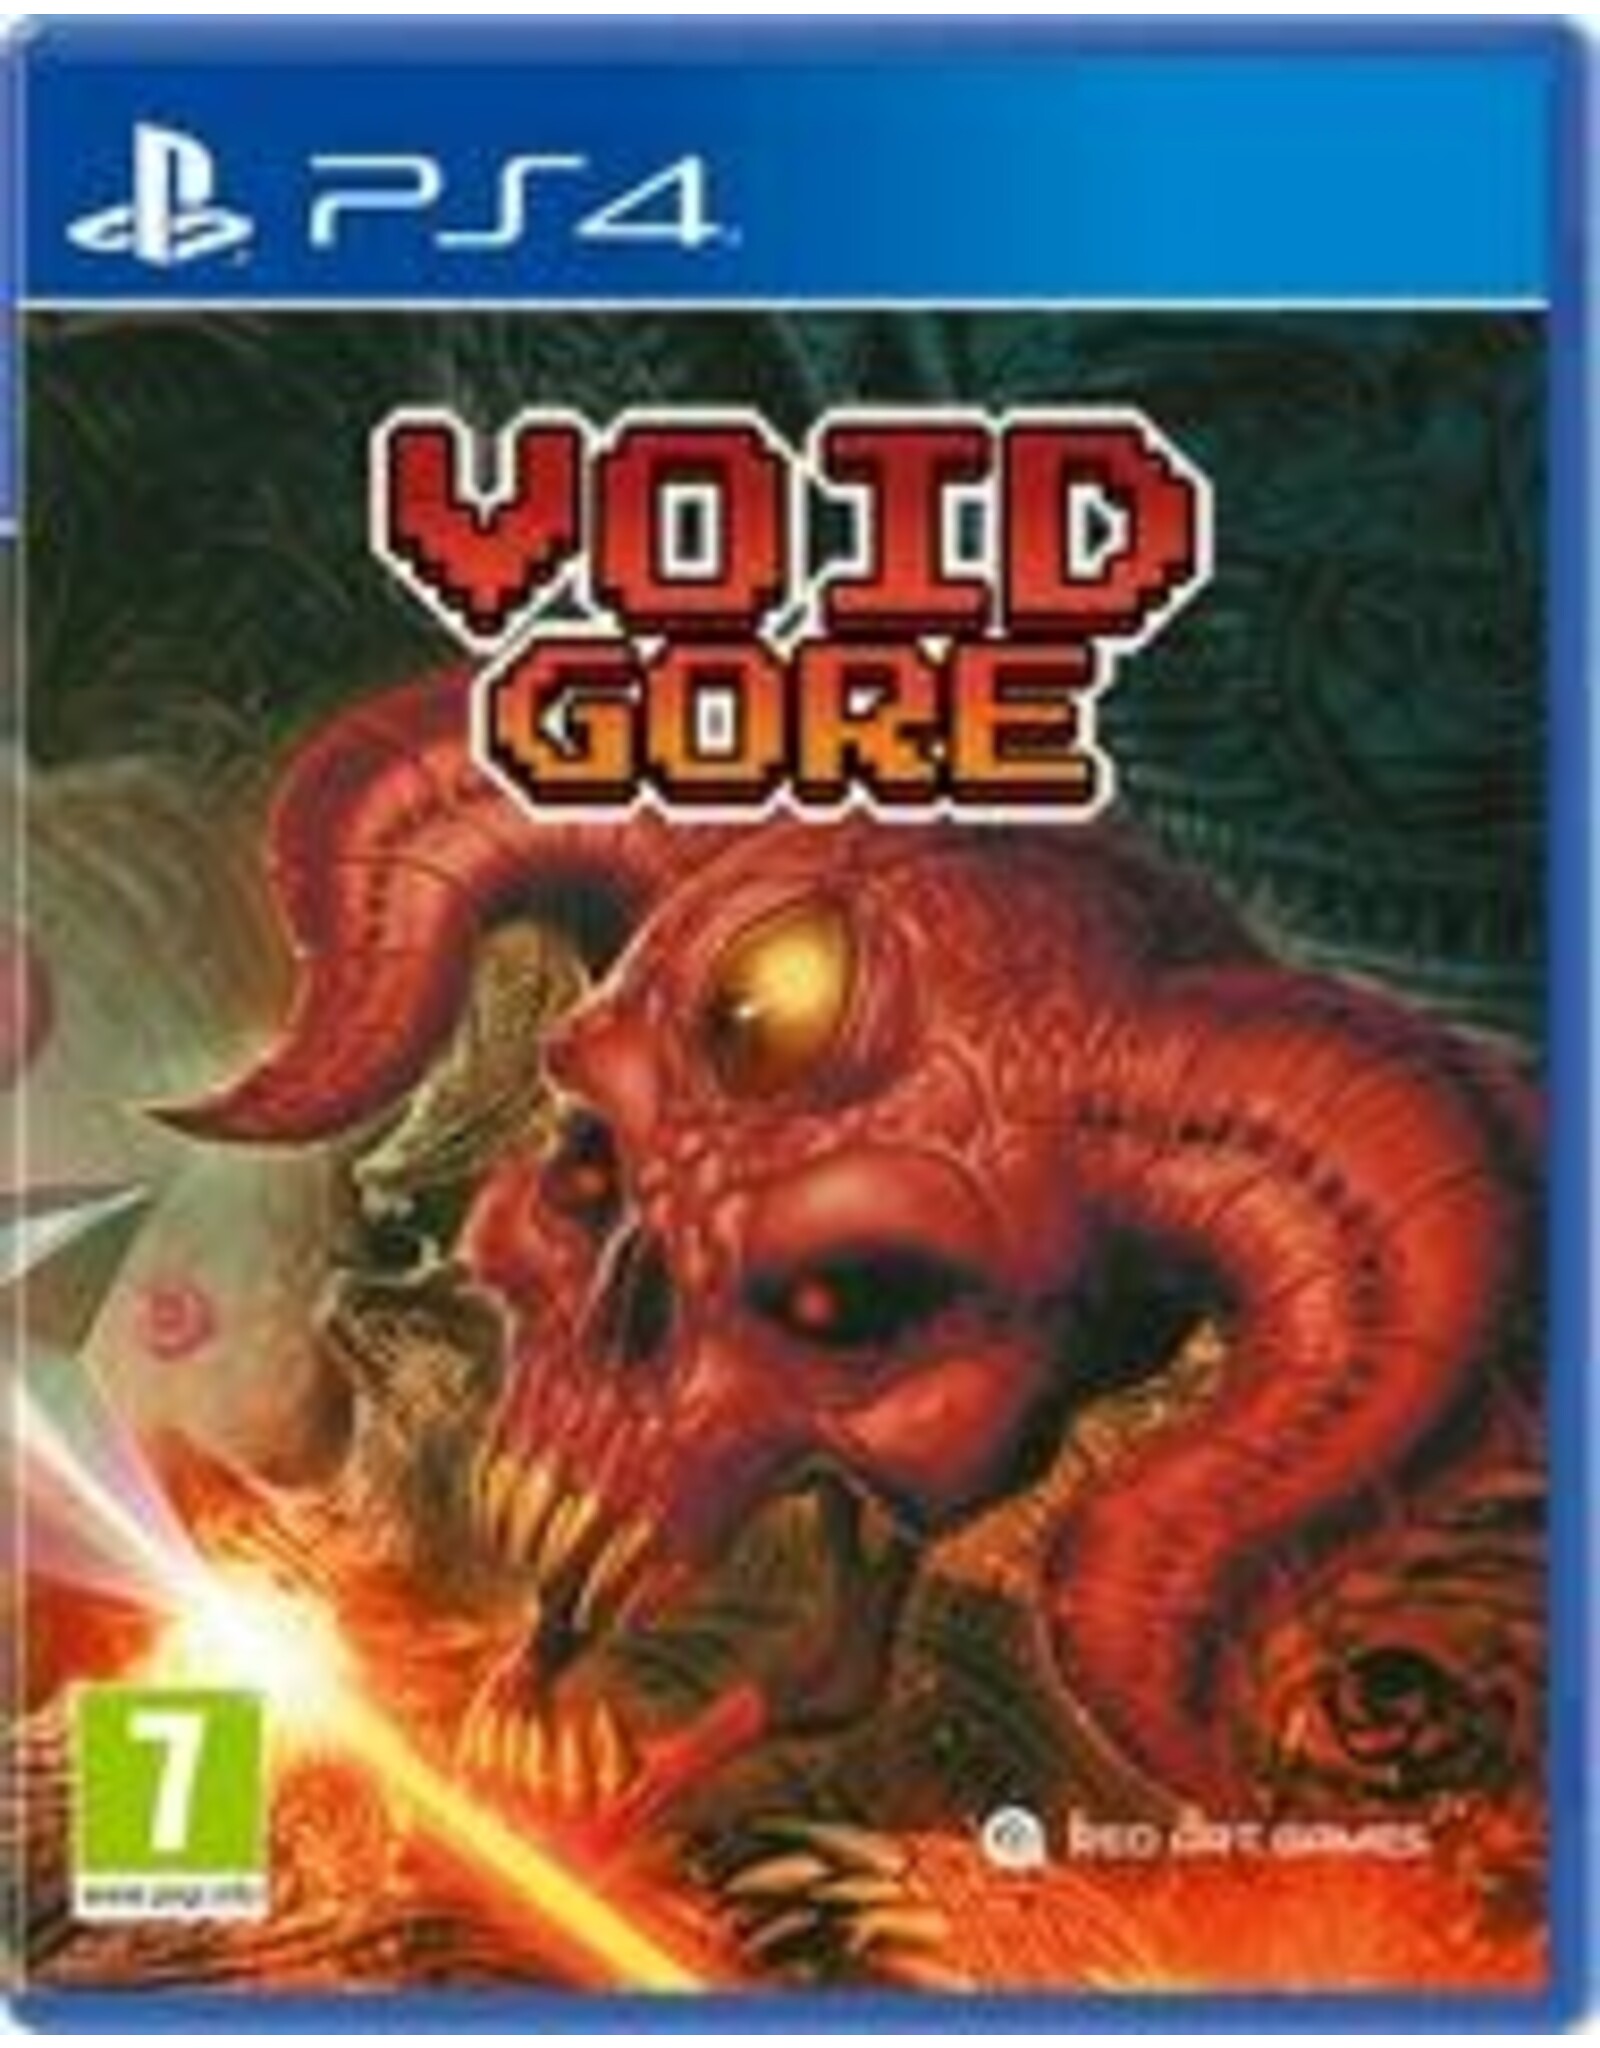 Playstation 4 Void Gore (PAL Import)